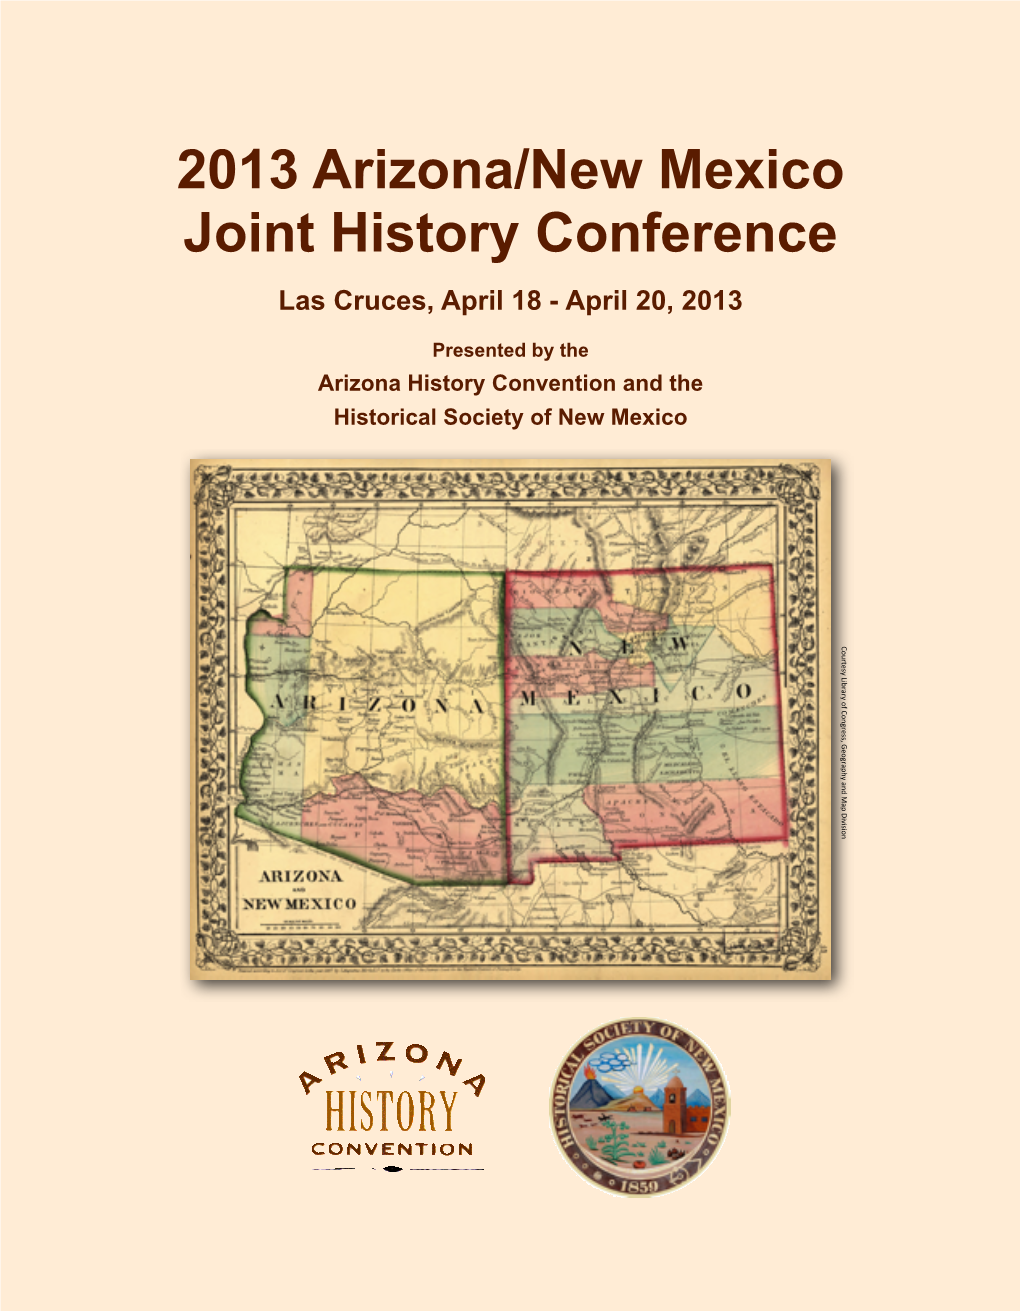 2013 Arizona/New Mexico Joint History Conference Las Cruces, April 18 - April 20, 2013